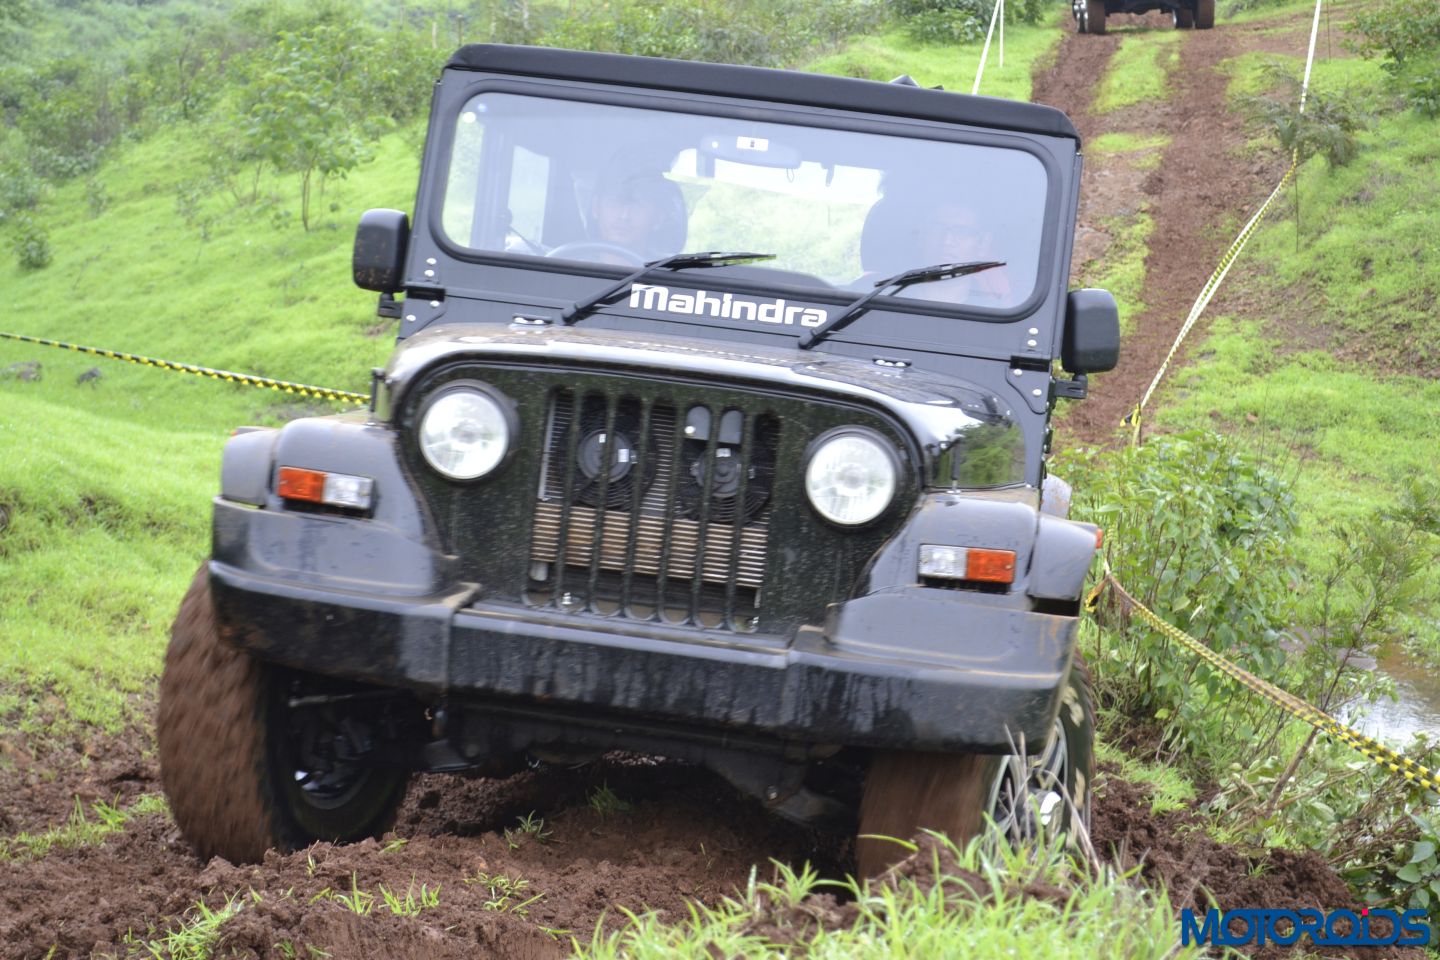 2015 Mahindra Thar Crde First Drive Review Iron Boar